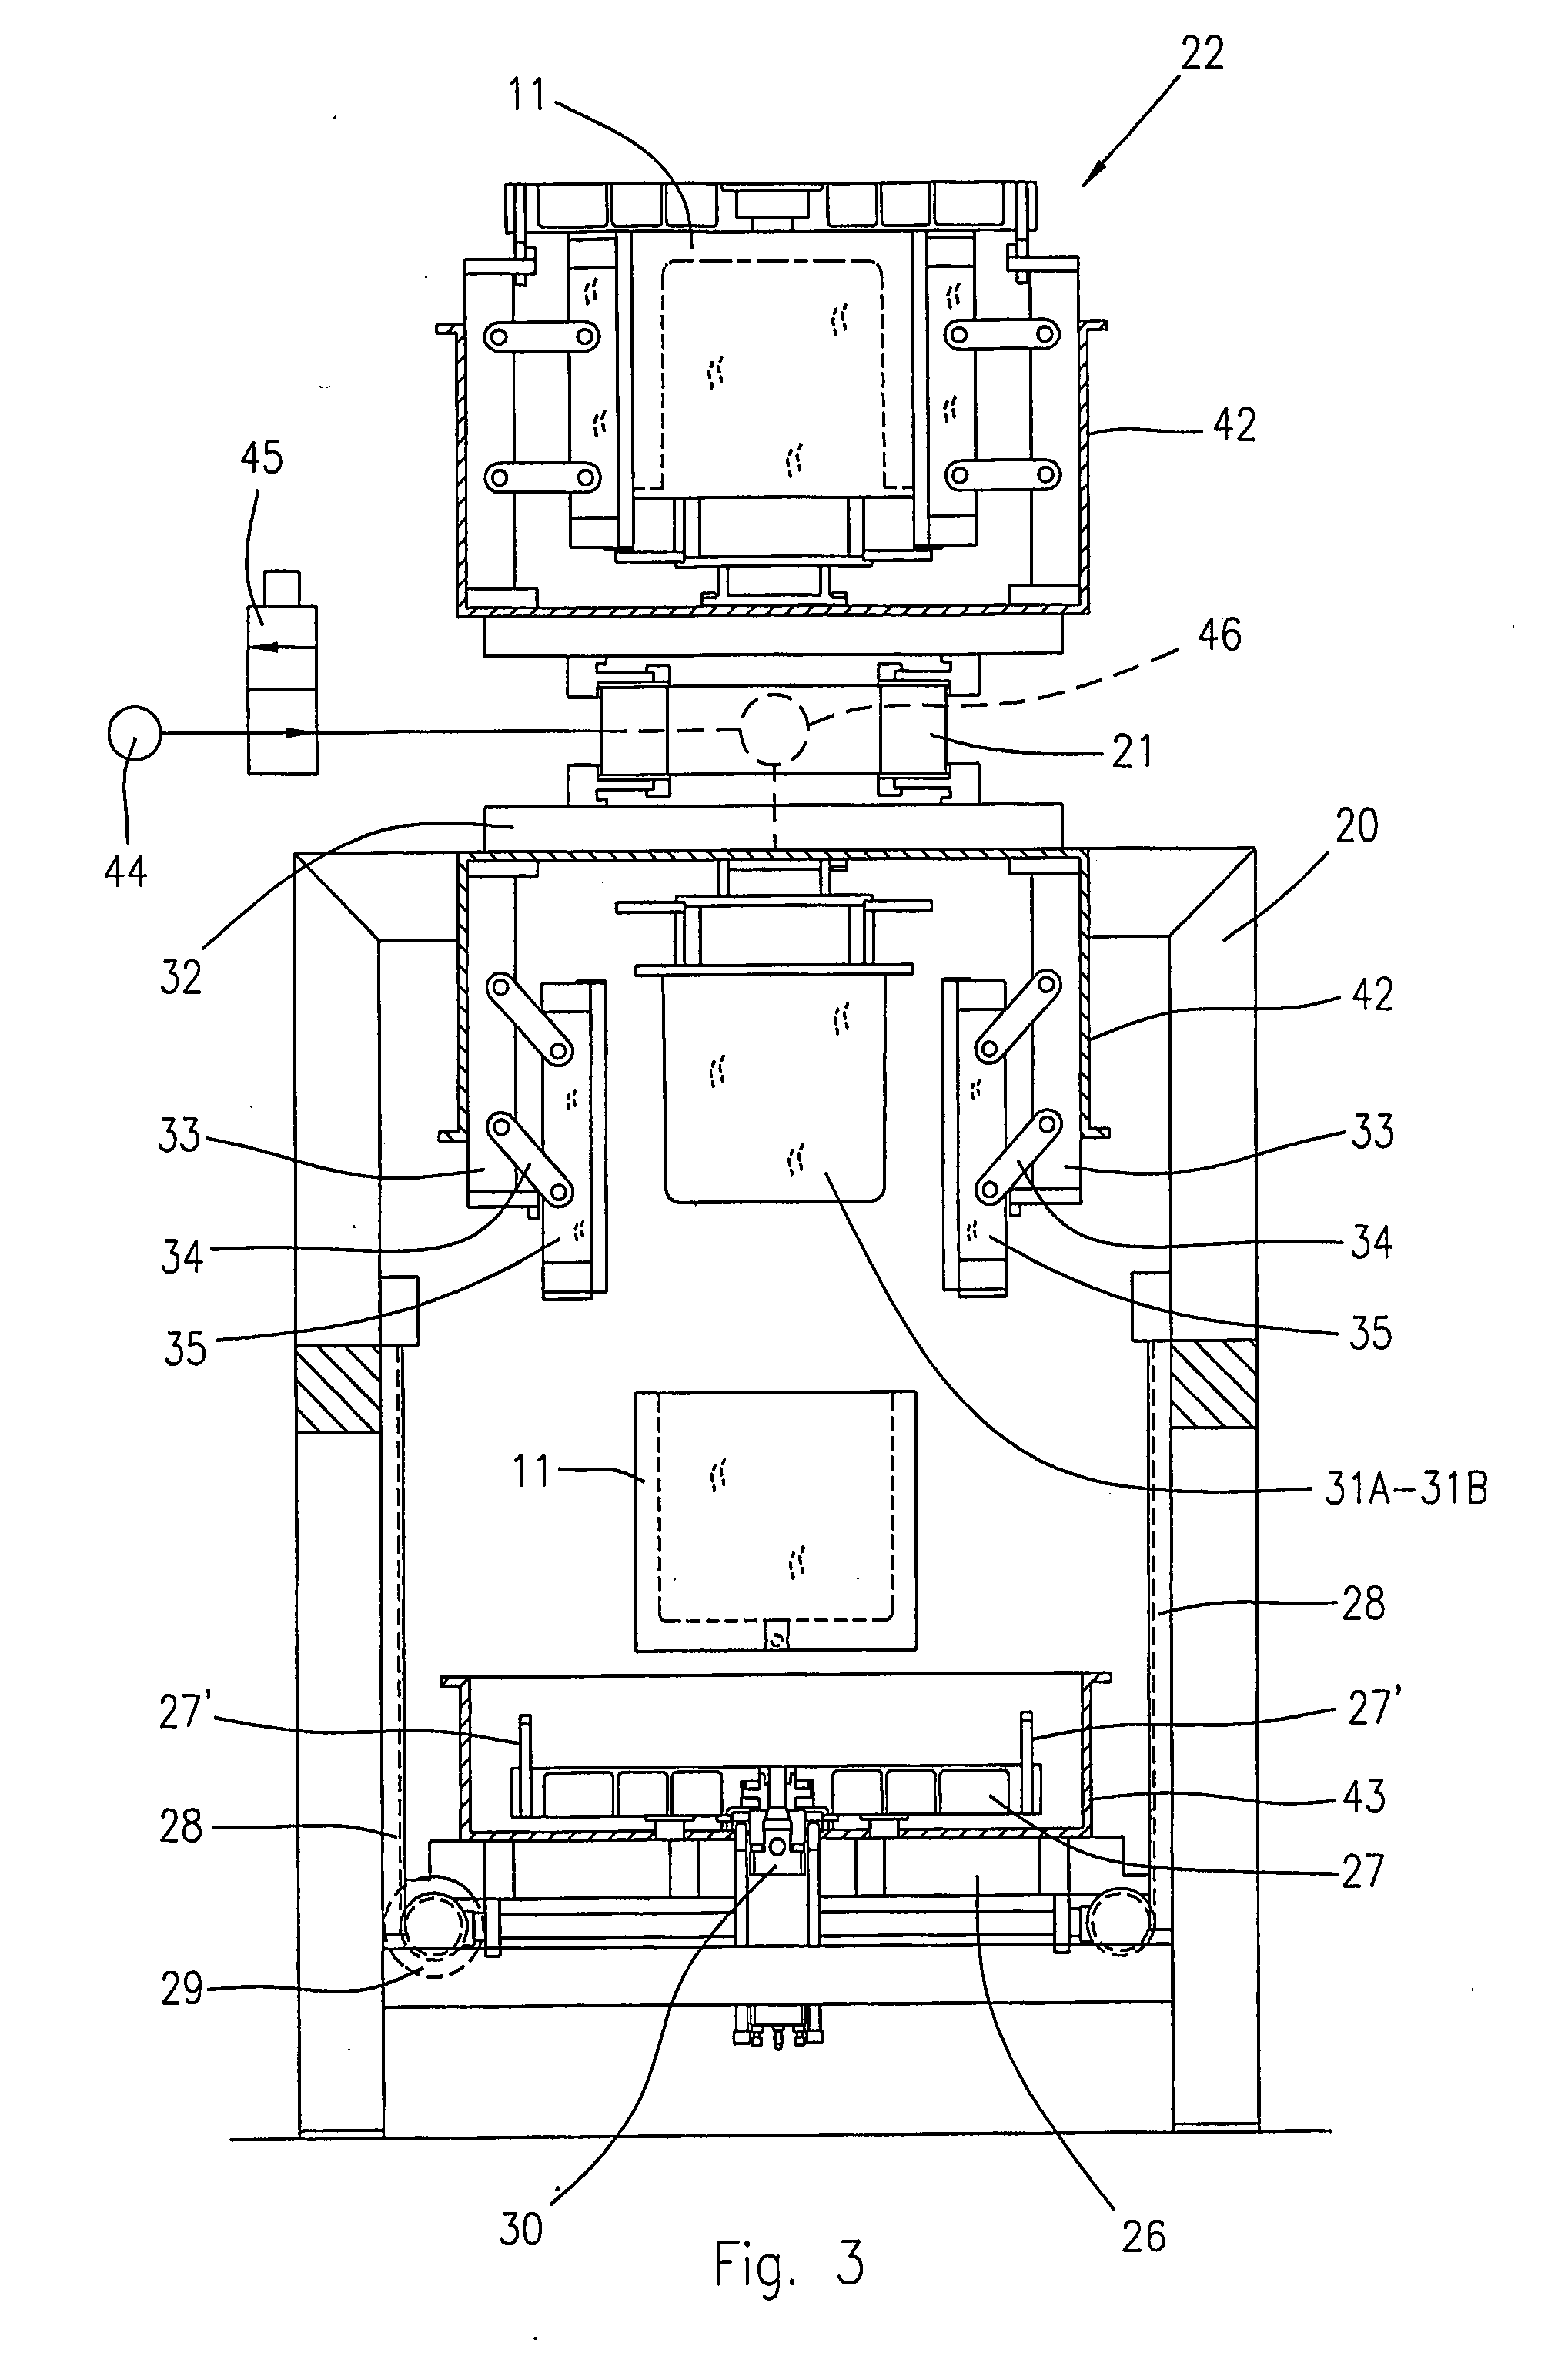 Method and Rotary Drum Installation for Vacuum Foaming of Refrigerators